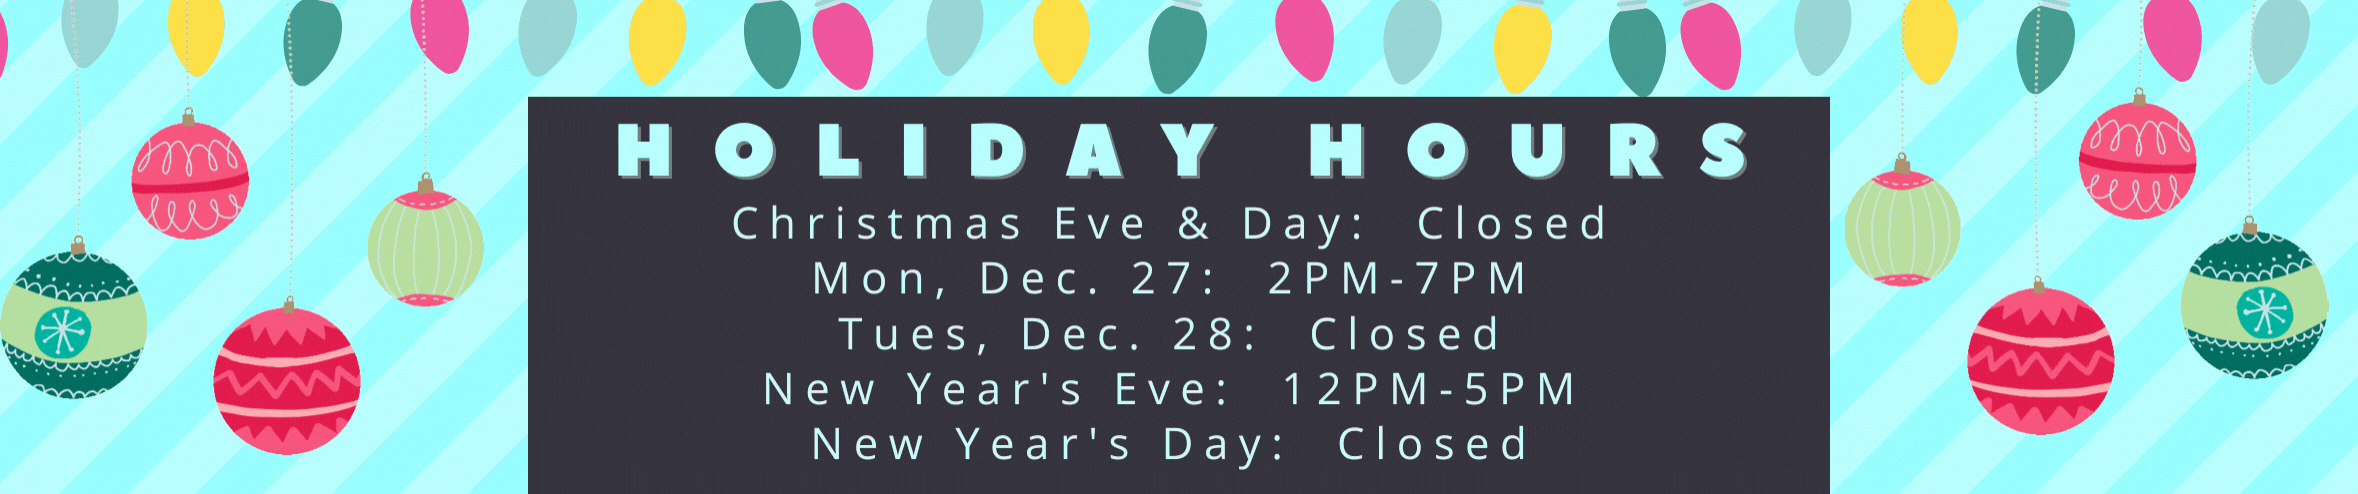 CBS - holiday hours